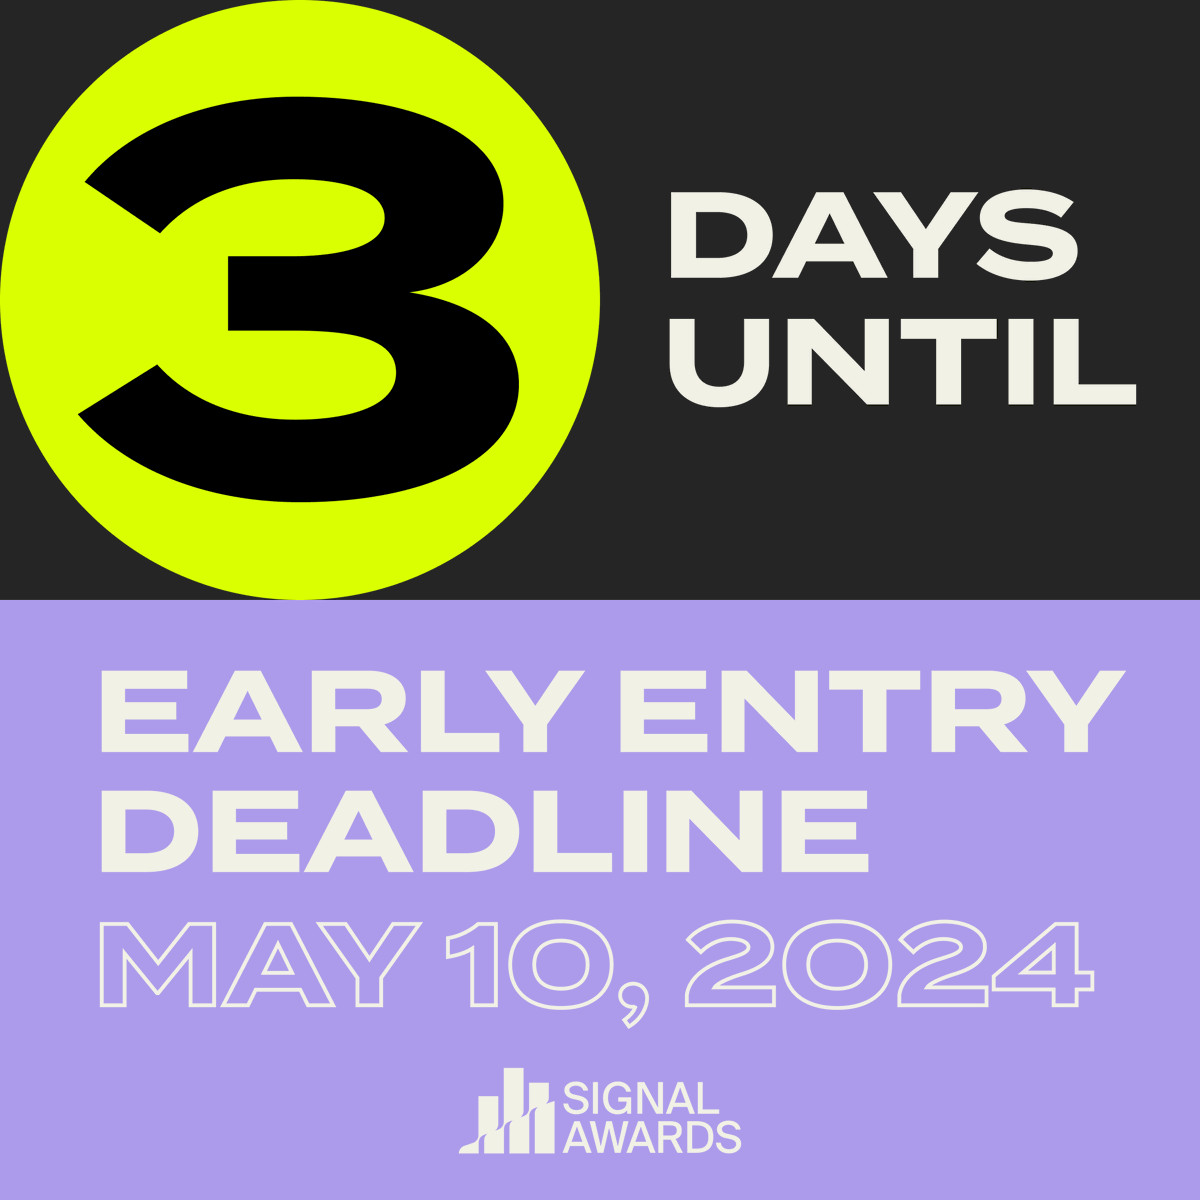 Only 3 Days left until our Early Entry Deadline on May 10th! Take advantage of preferred early pricing and have your podcasts heard by leaders in the industry. 🎧 Learn more about our mission, and enter your podcasts, at ow.ly/M1Qs50RwalM!